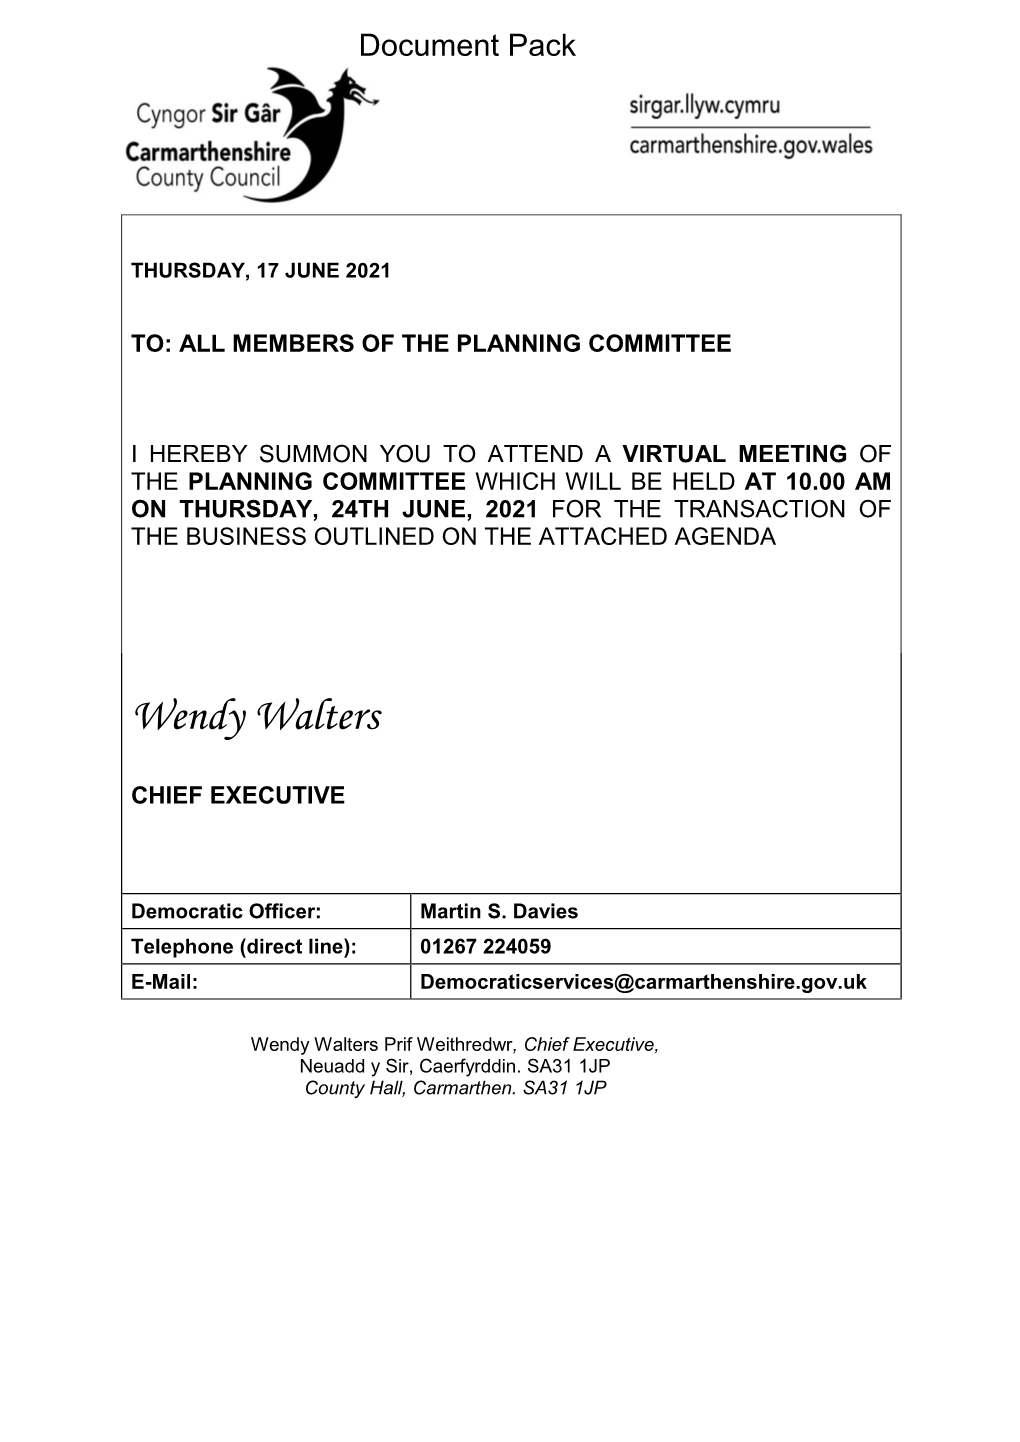 (Public Pack)Agenda Document for Planning Committee, 24/06